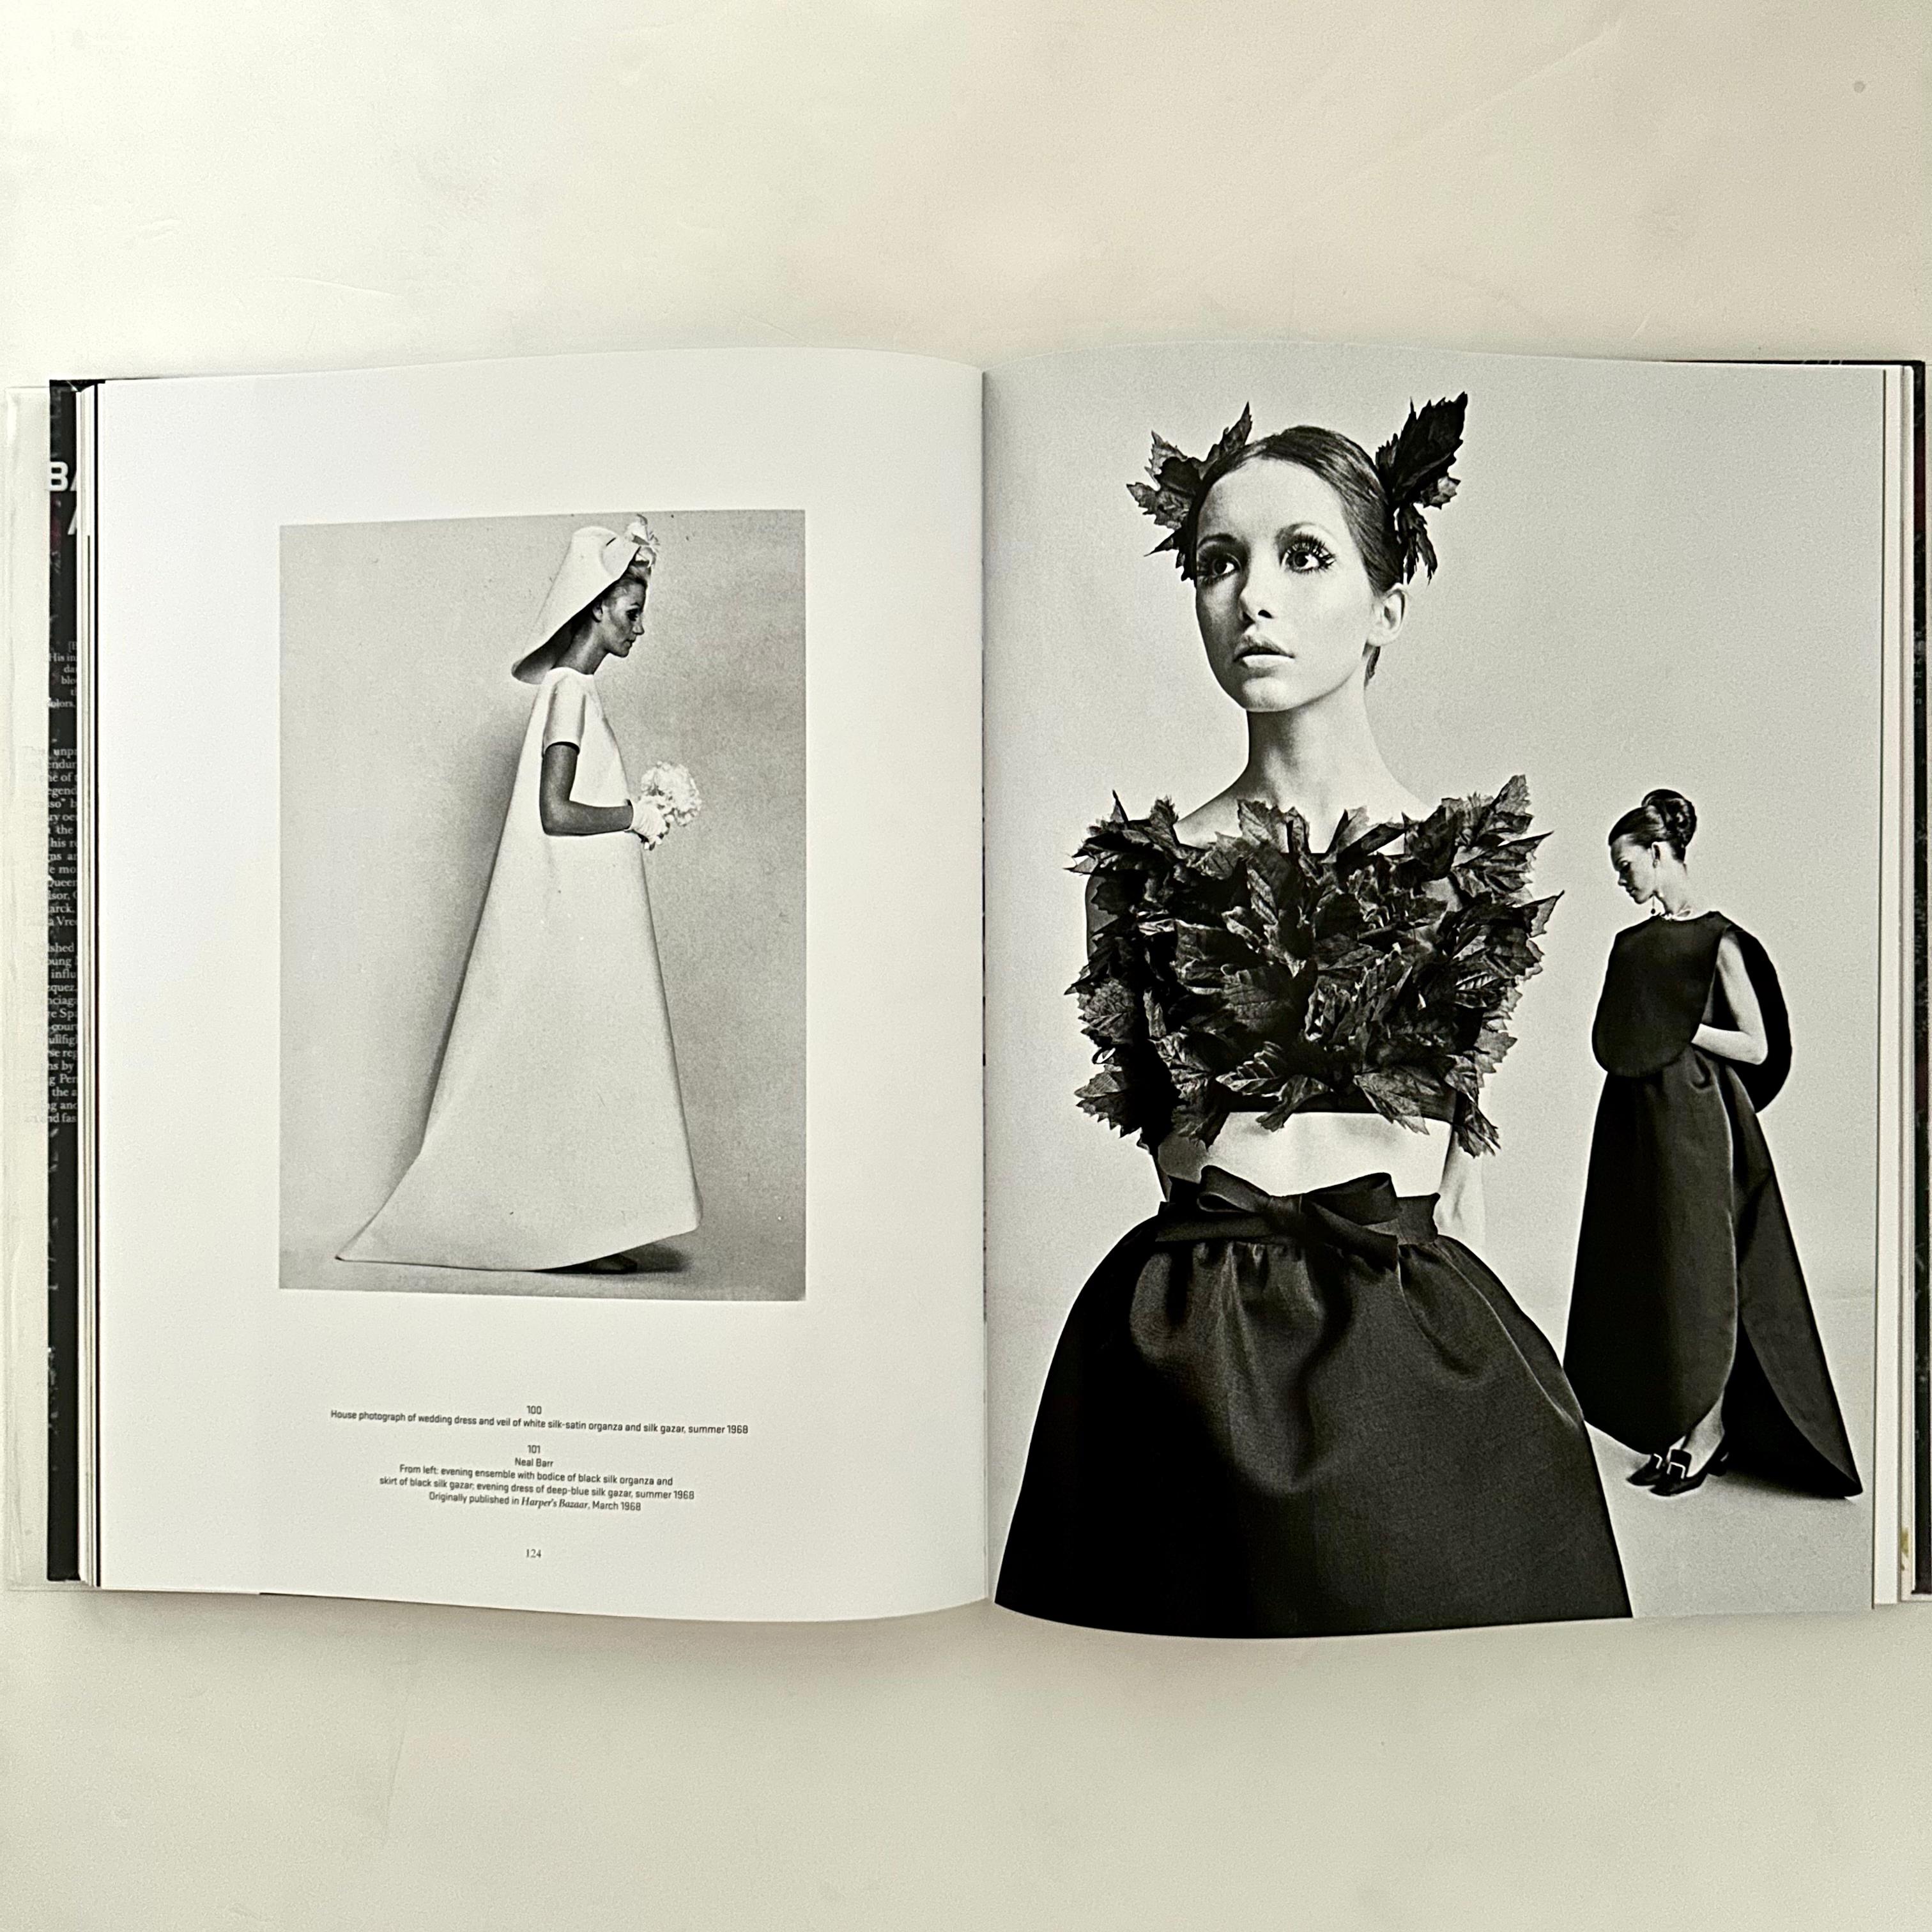 Published by Rizzoli & Fine Arts Museums of San Francisco, 1st edition, New York, 2011. Hardback with English text. 

Quintessentially Spanish, Balenciaga took inspiration from the bullrings, the flamenco dancers, the fishermen in their loose